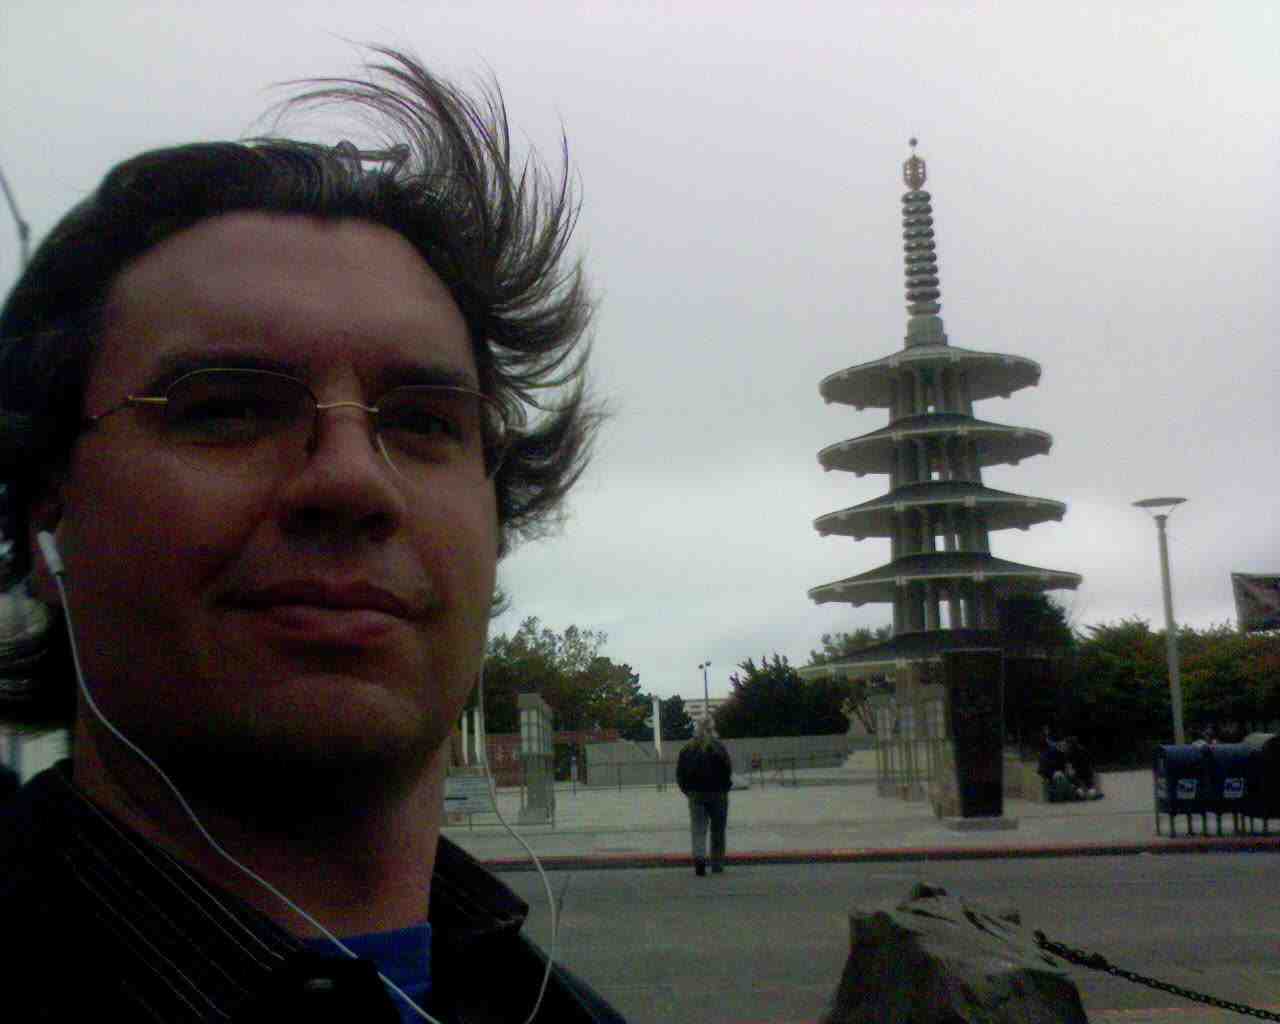 Little Tokyo, SF, Aug 17, 2005.  Bloody cold out.